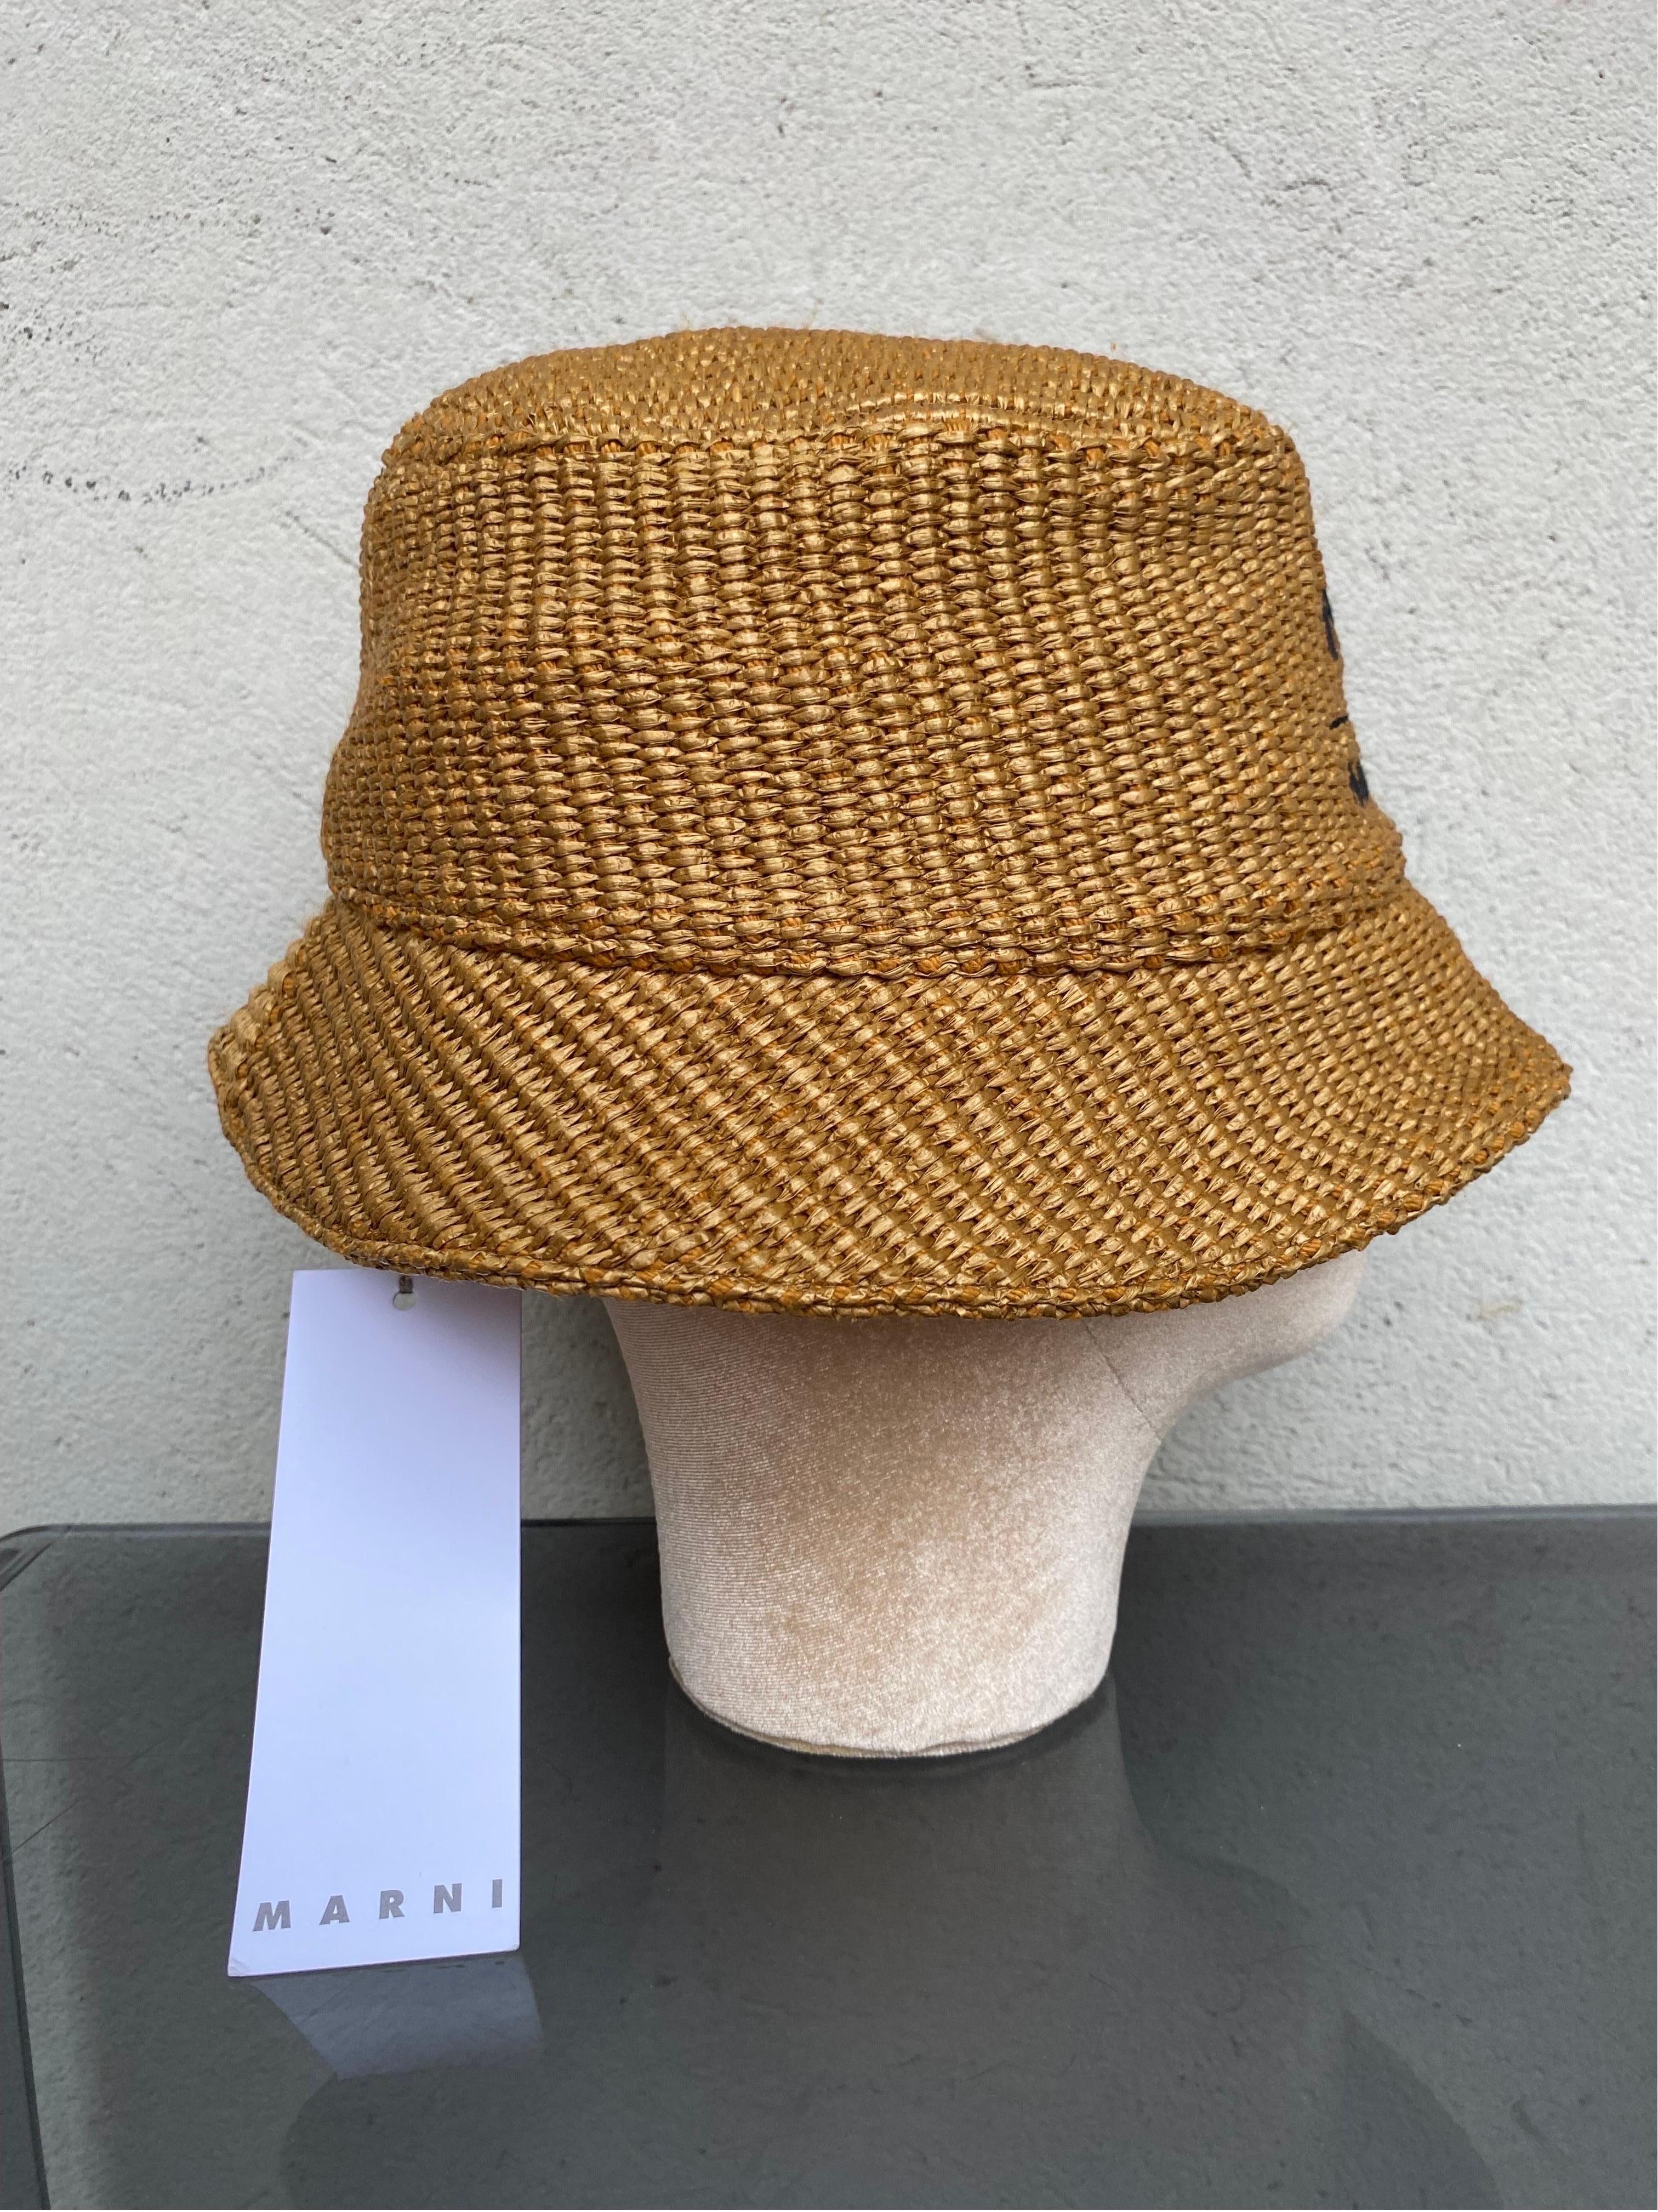 BUCKET HAT MARNI
Made of cotton and nylon. Caramel colour.
Size M. 165/88A
New with label.